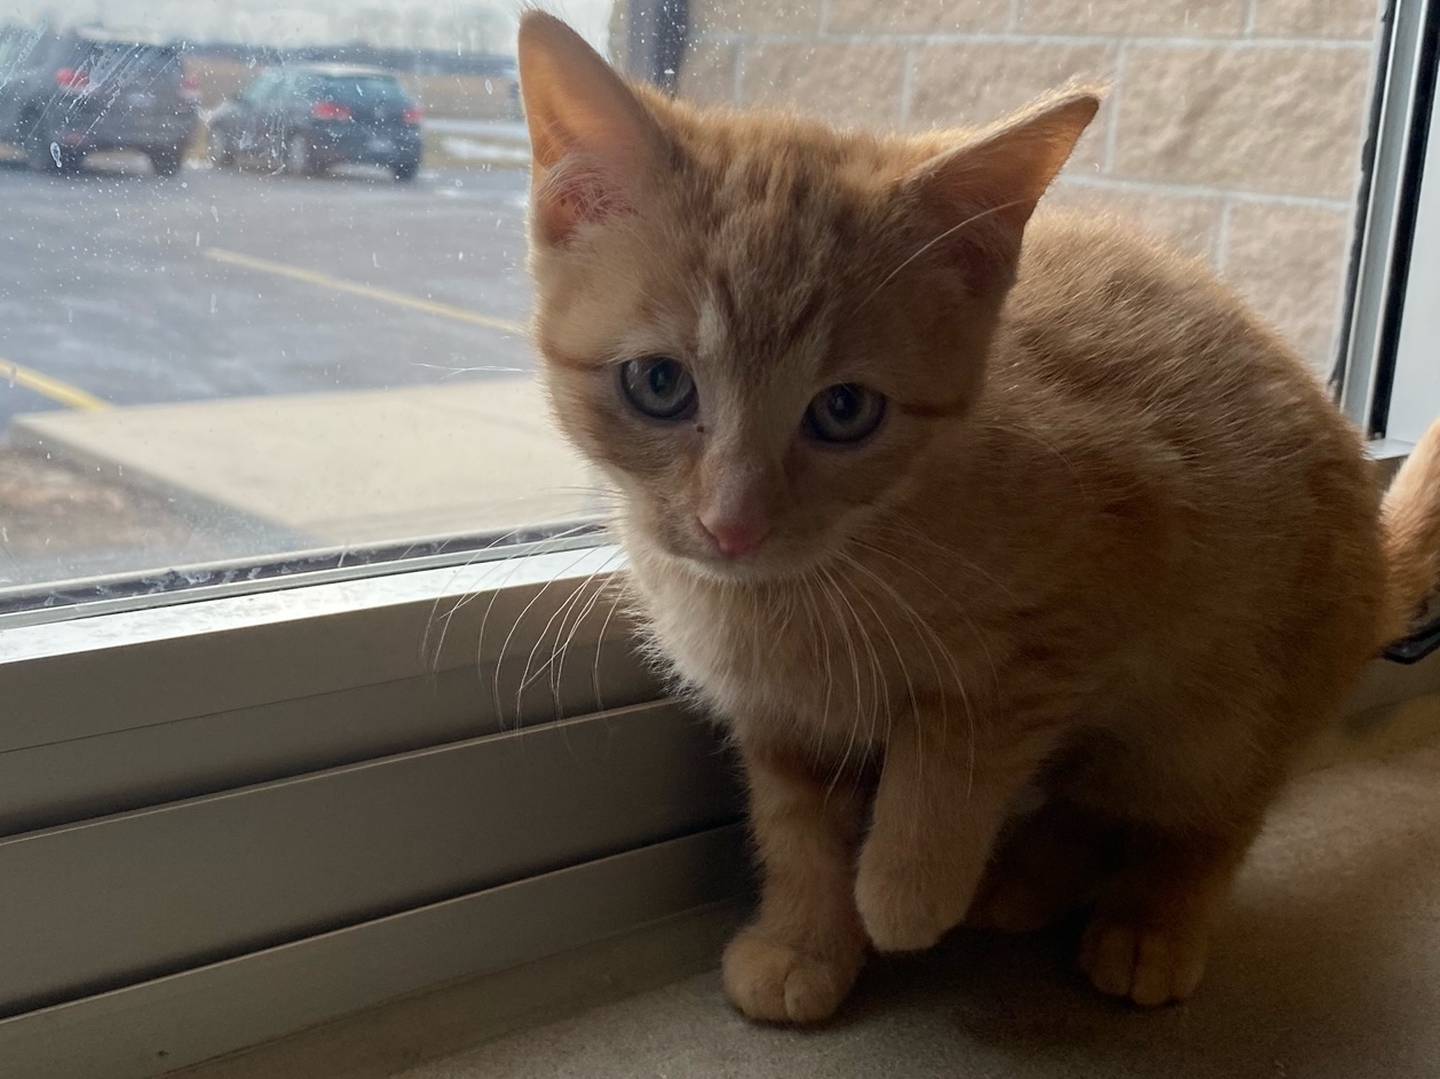 Ginny is a 10-week-old orange female tabby. She is playful and very loving. Ginny loved to be cuddled and held. She gets along well with other cats.  For additional information on Ginny, including adoption fees please visit https://www.grundyco.org/animal-control/. All animals are spayed/neutered, Rabies Vaccine, Microchipped, de-wormed, distemper combo, and flea protection.